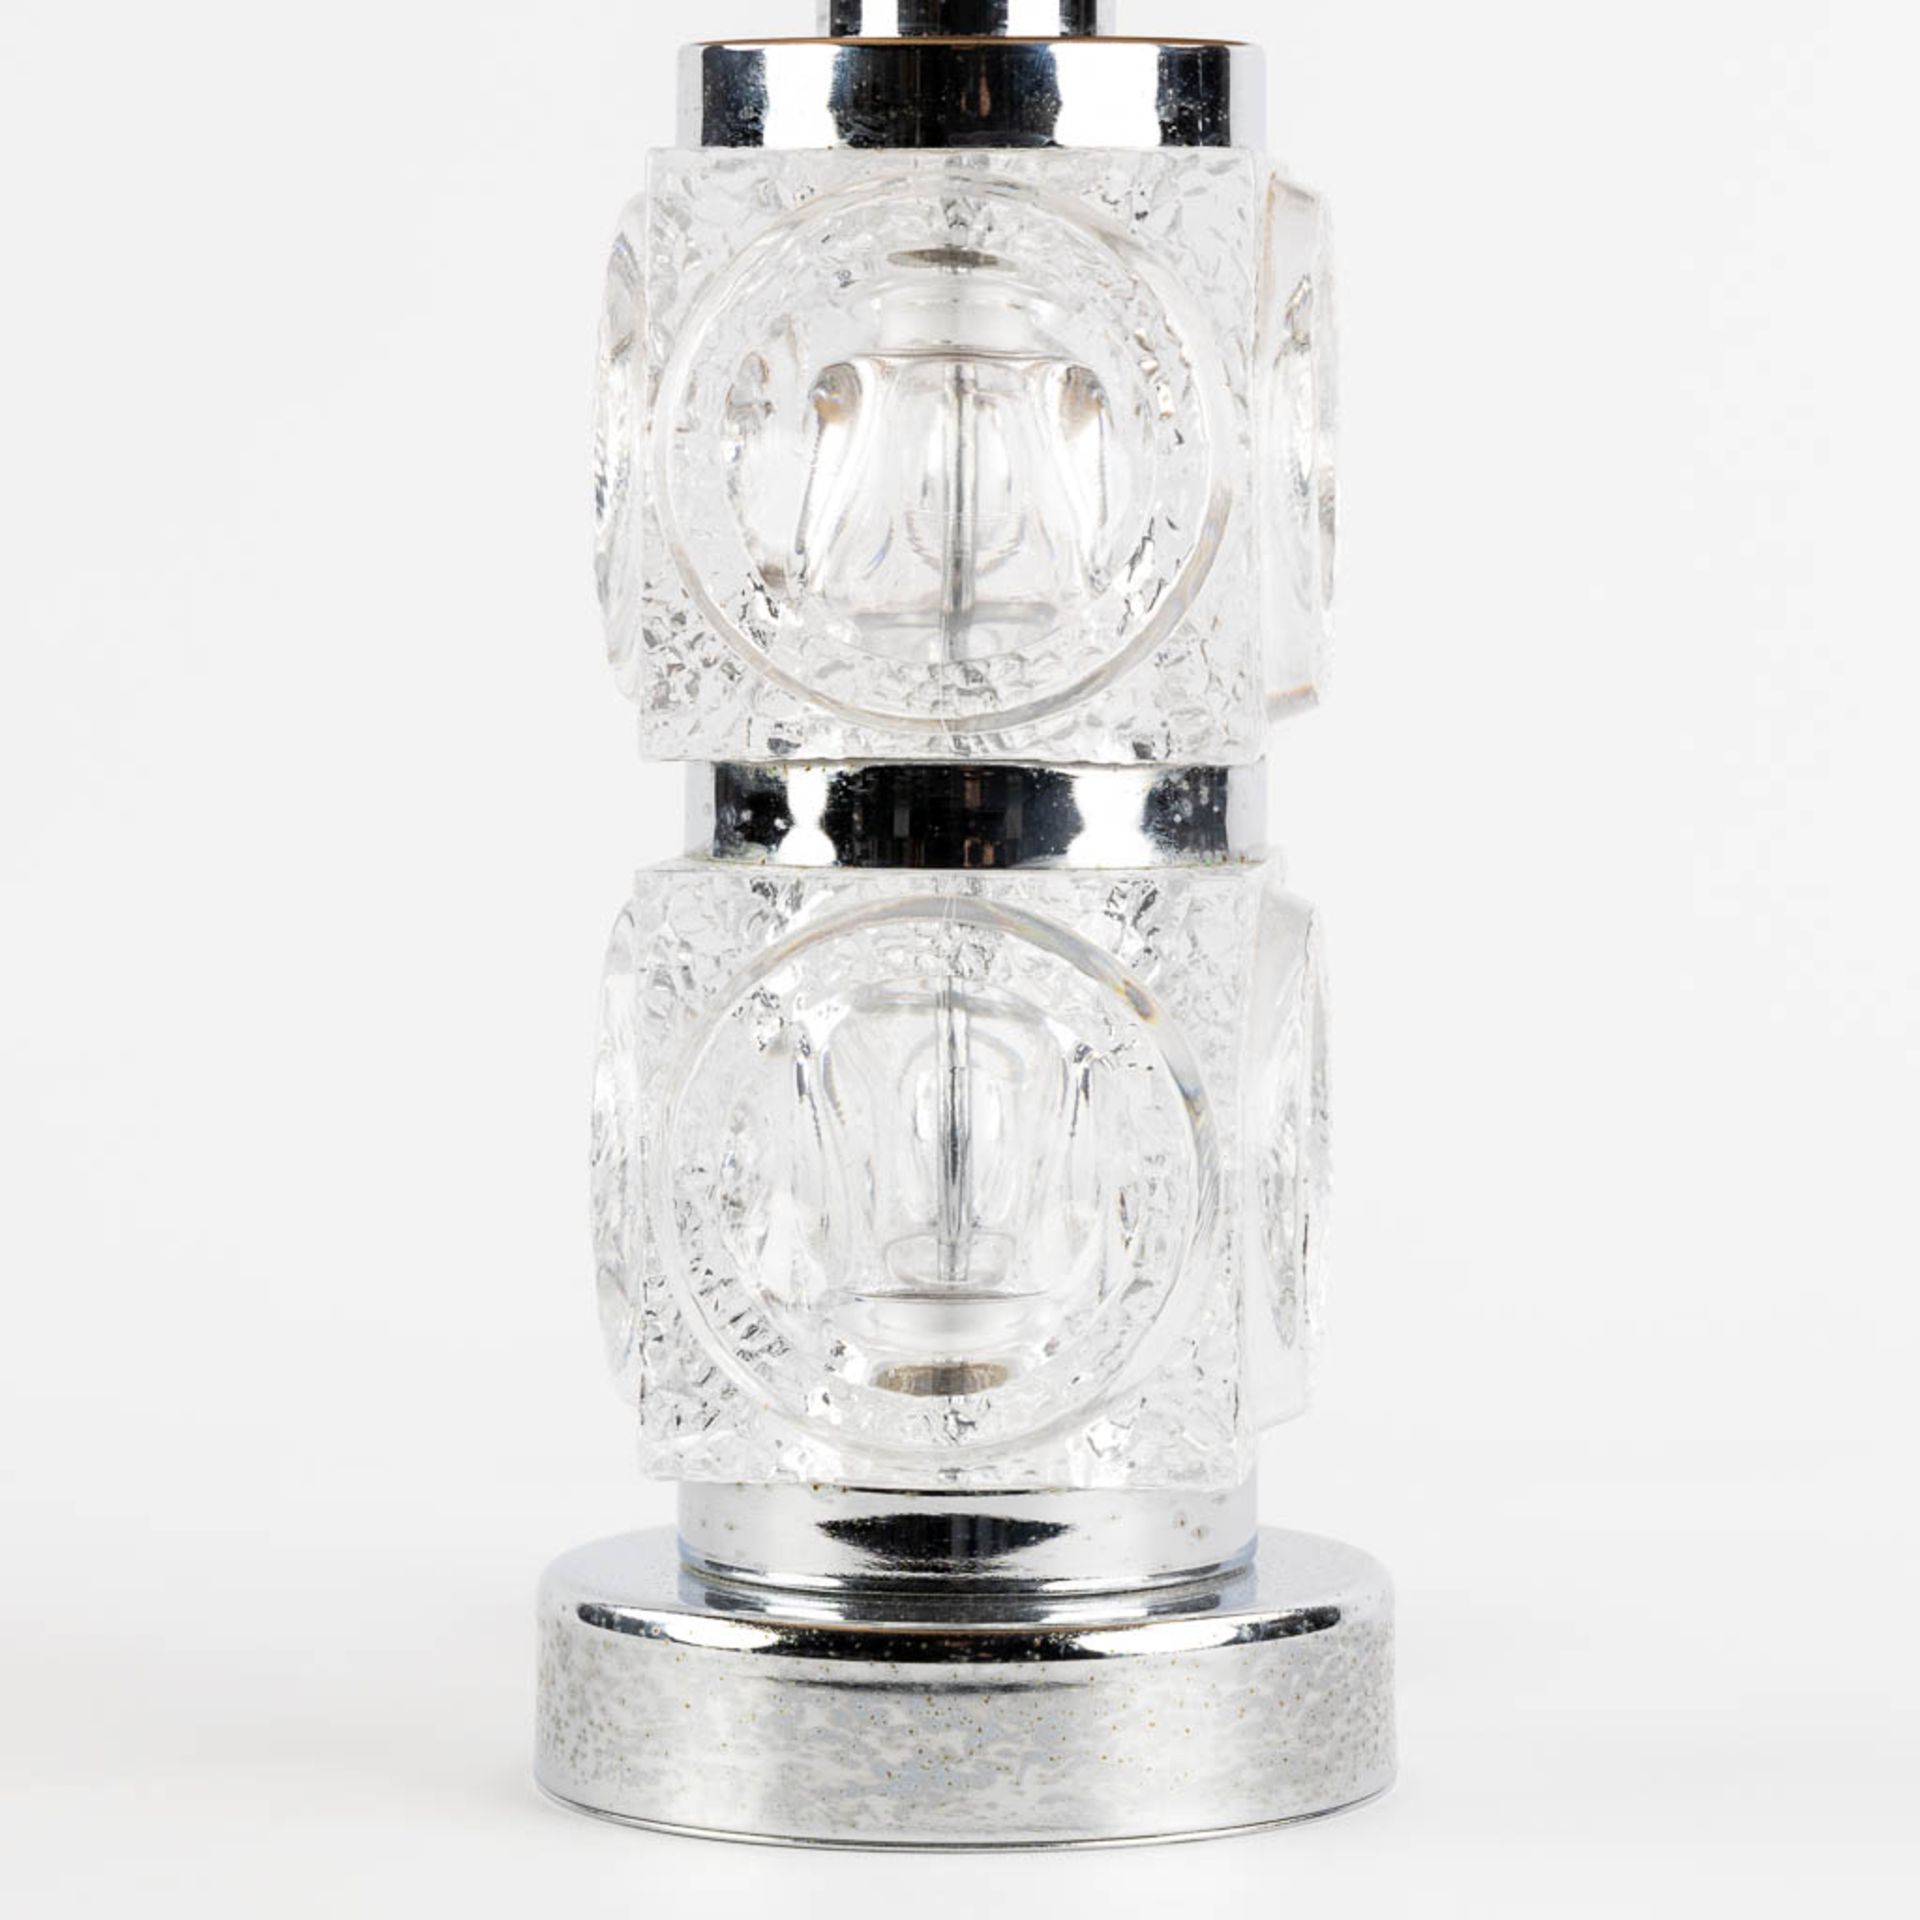 A mid-century table lamp, chromed metal and glass. Circa 1970. (H:37 x D:12,5 cm) - Image 8 of 9